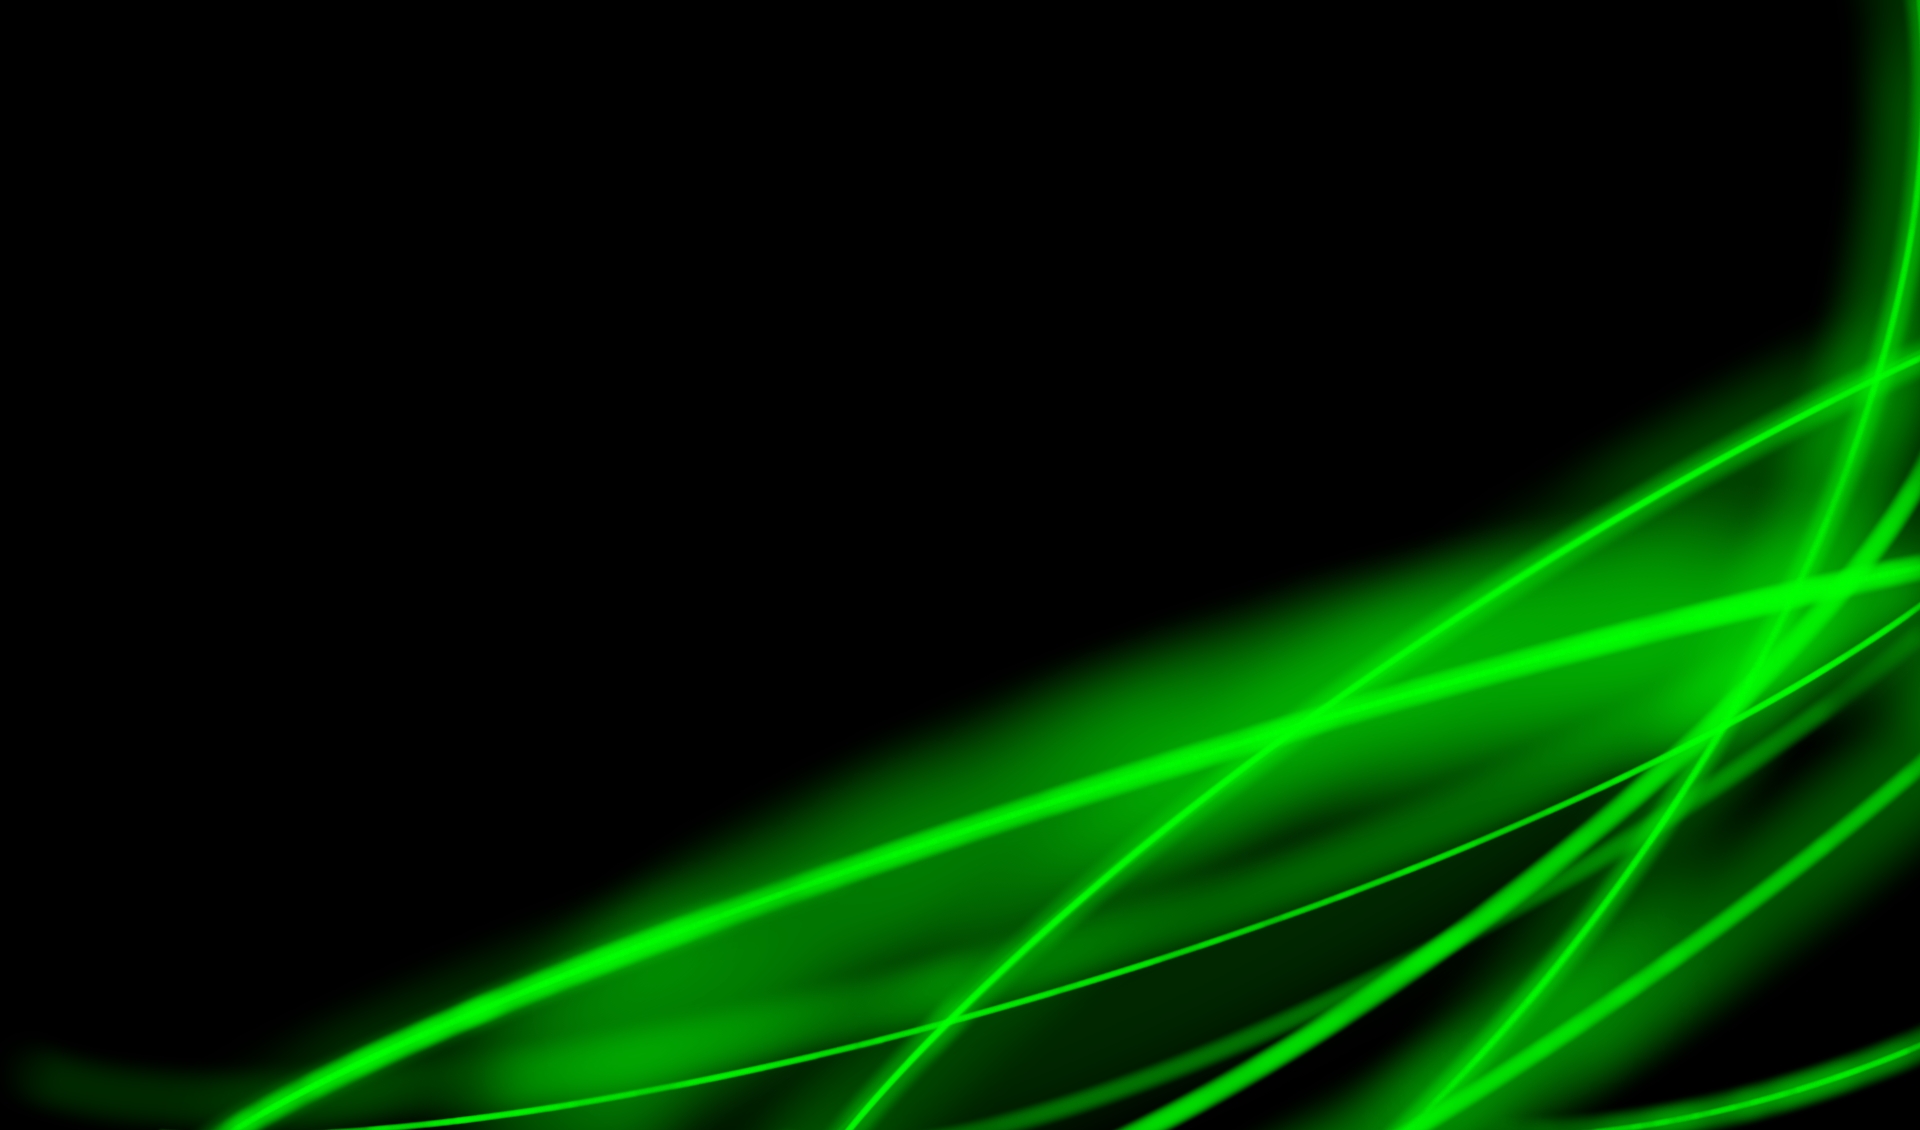 Neon Background v1 by Dragon Dew on